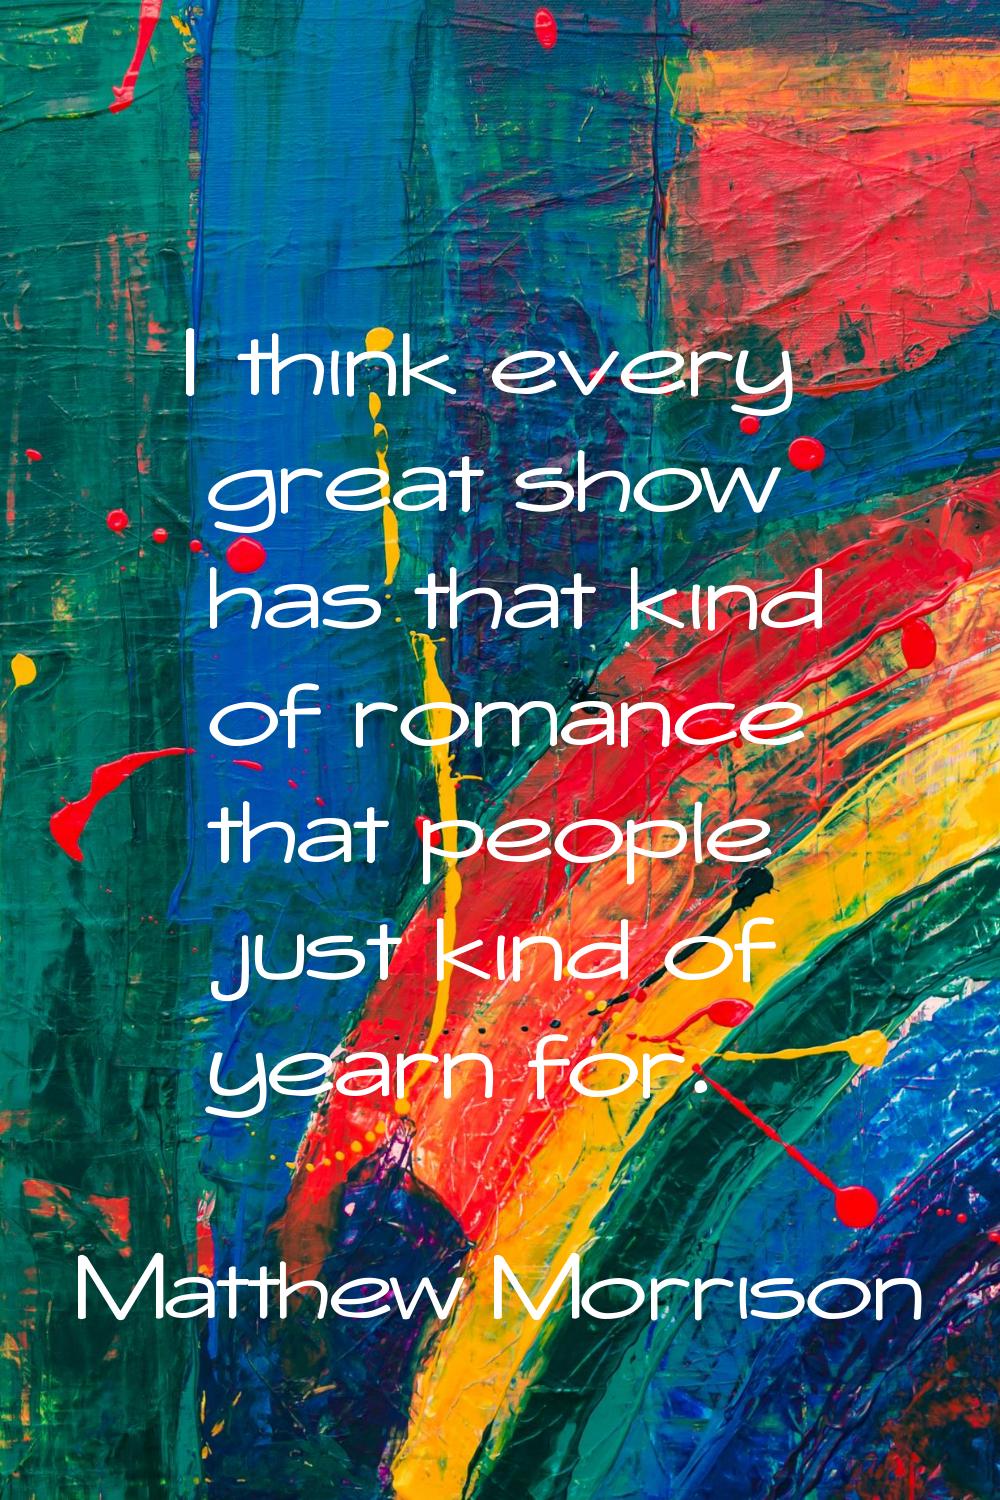 I think every great show has that kind of romance that people just kind of yearn for.